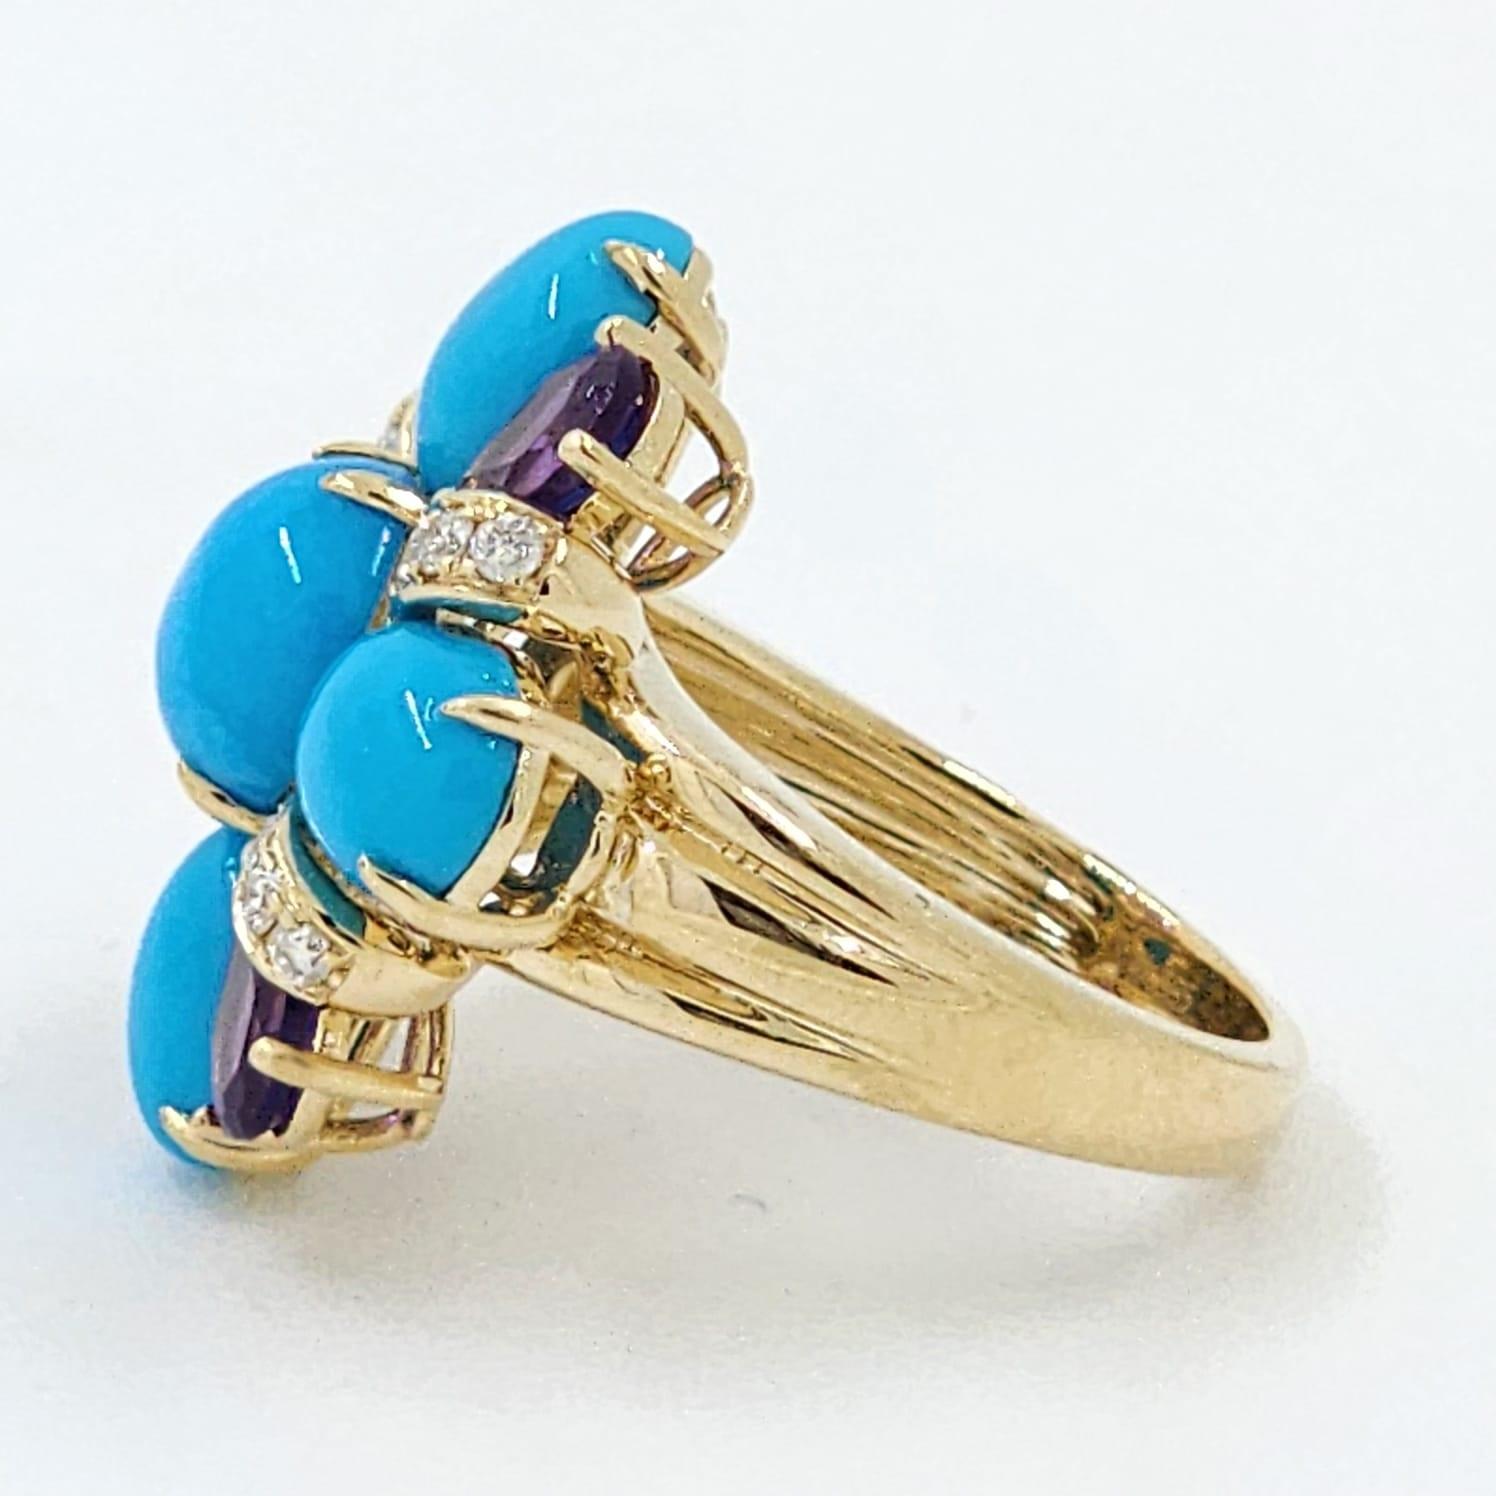 Vintage Sleeping Beauty Turquoise Amethyst and Diamond Ring in 14 Karat Gold For Sale 2